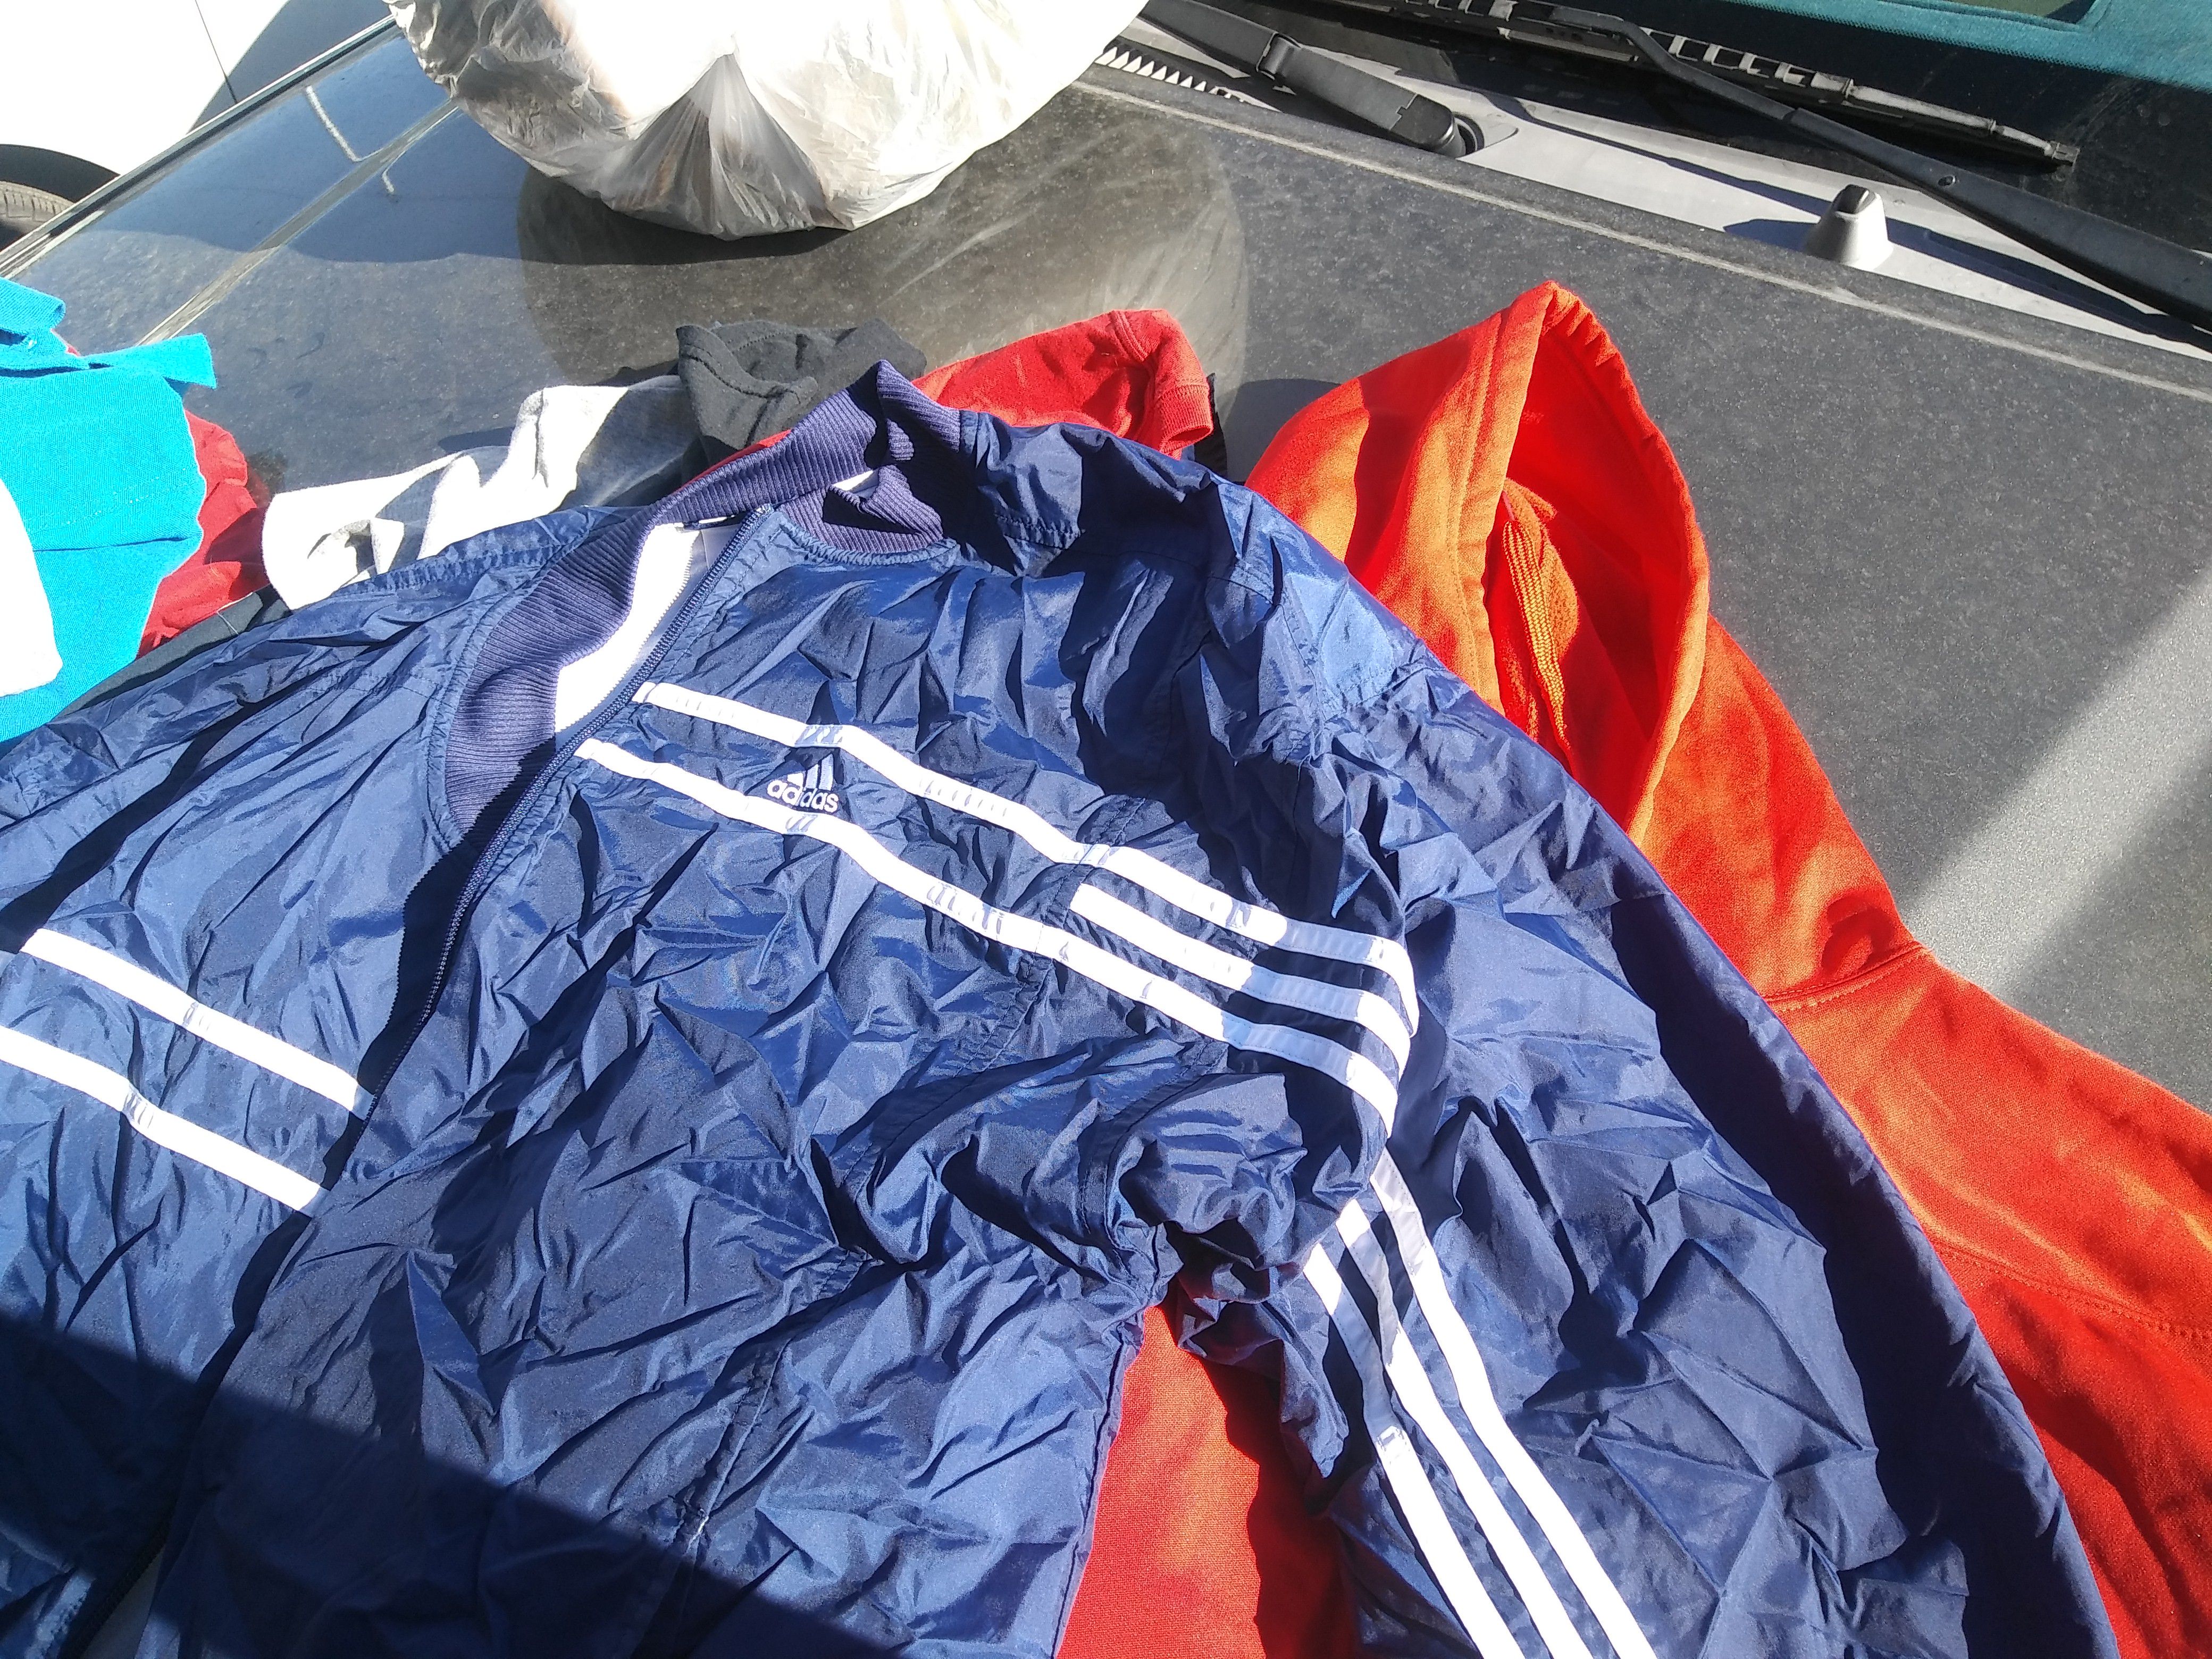 Levis. Adidas. Quicksilver and more for Sale in North Las Vegas, NV - OfferUp